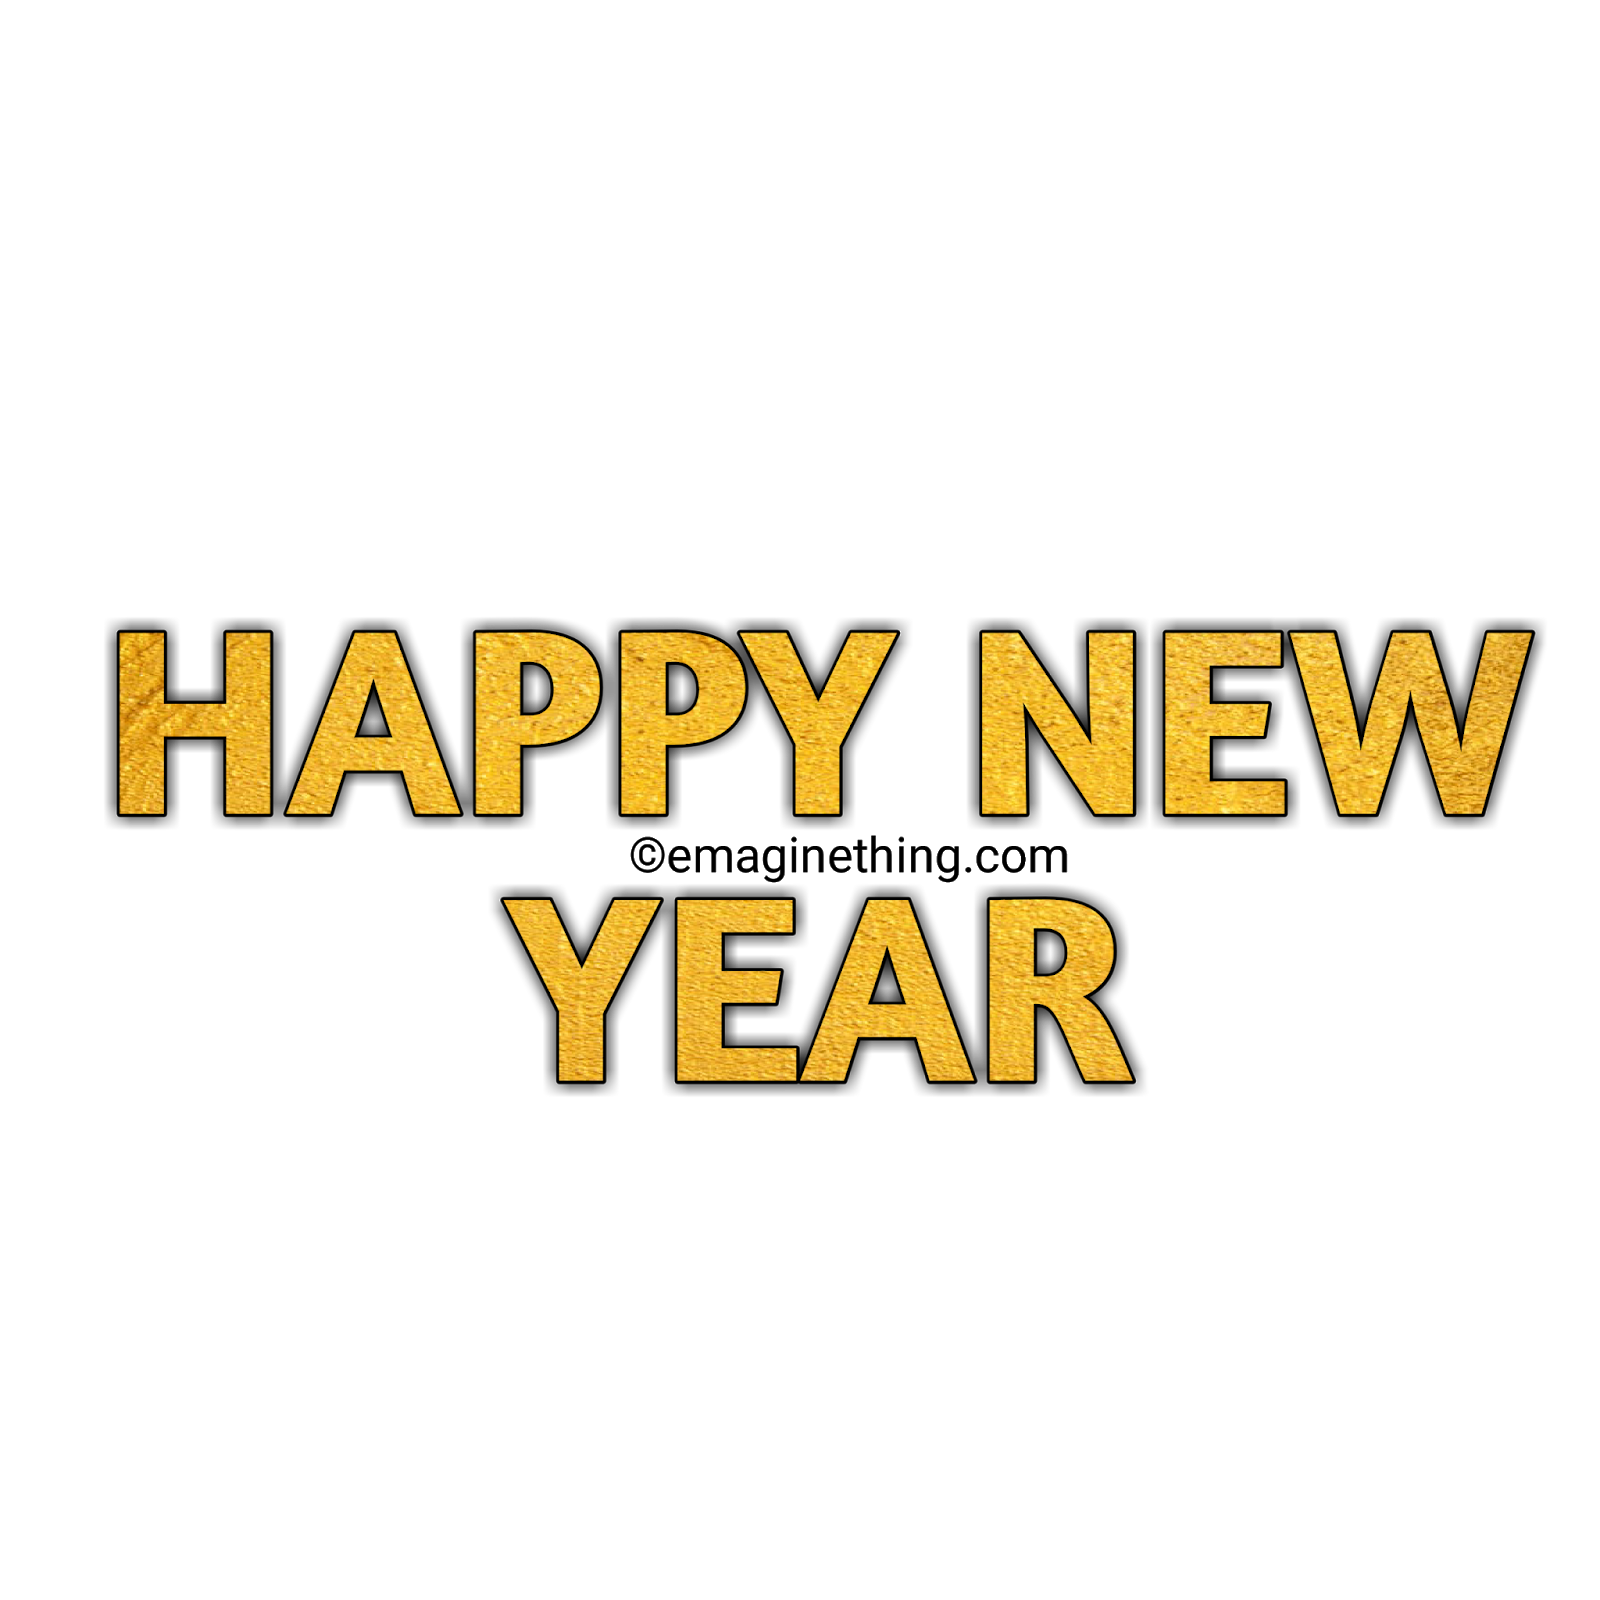 Happy New Year Text Png 2019 Whatsapp Sticker